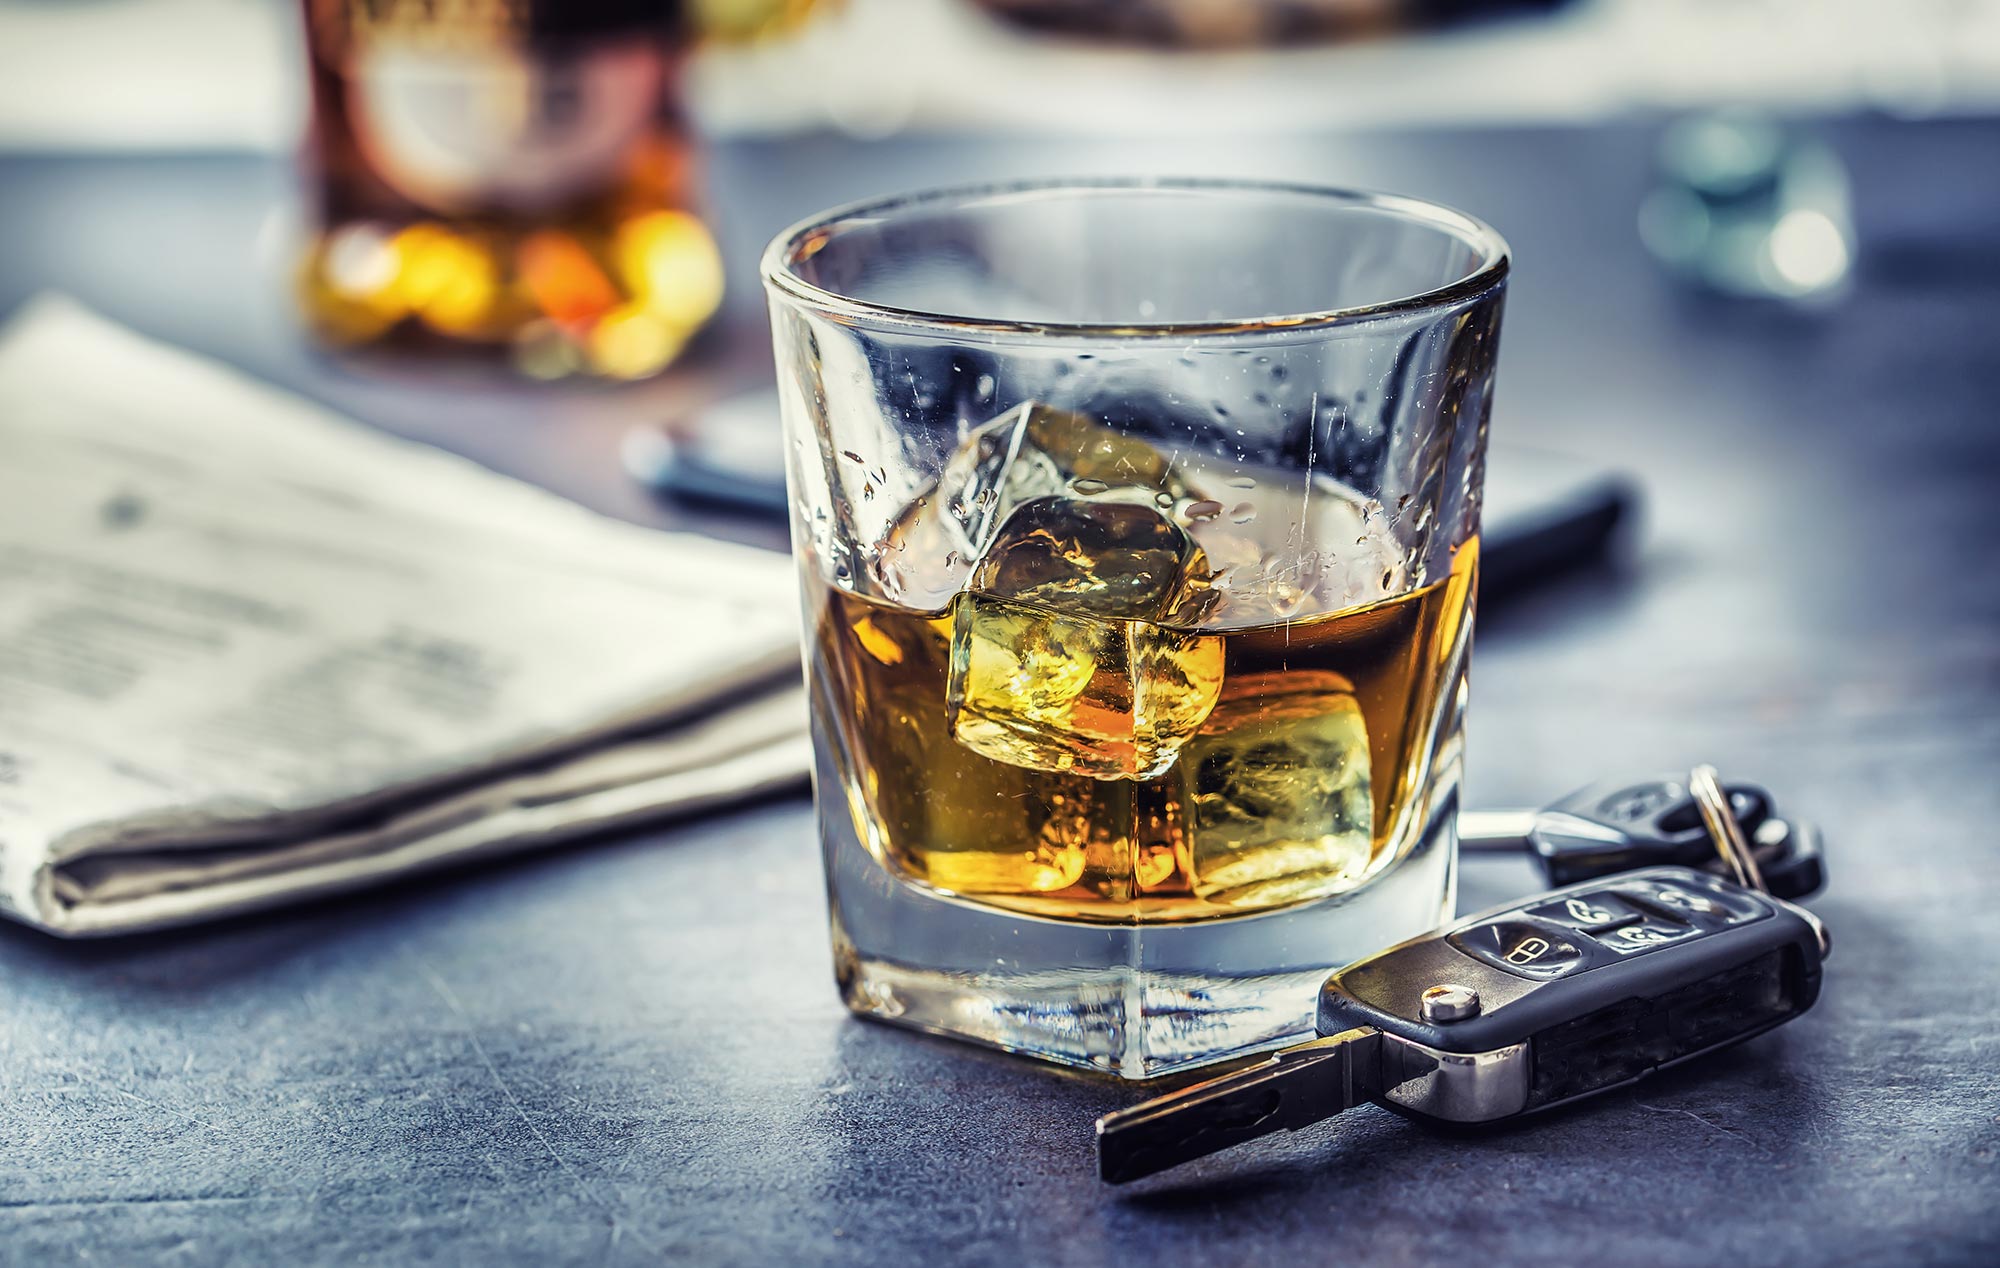 A small glass of ice and whiskey sits next to a set of car keys.